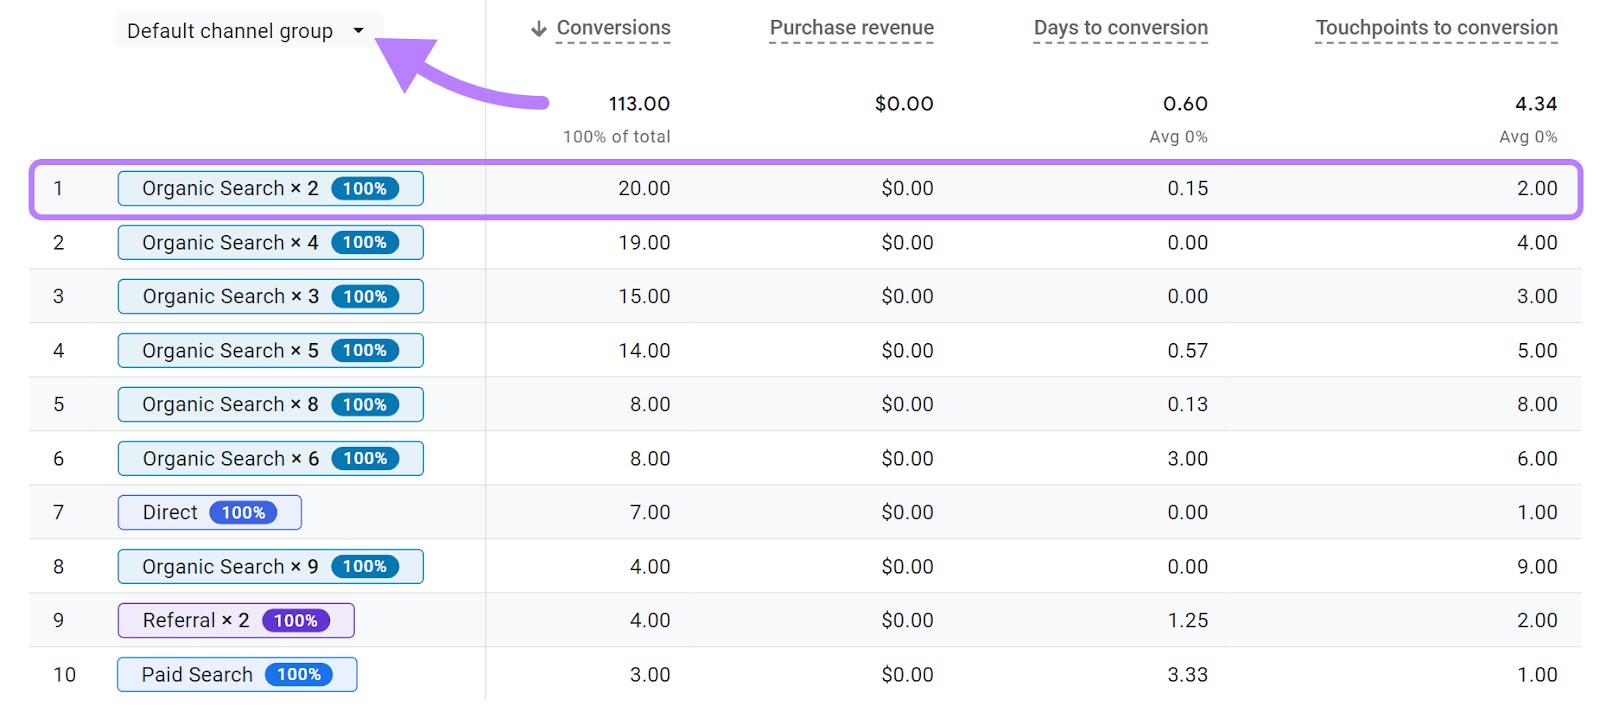 the report shows the most common conversion path is two separate visits via organic search